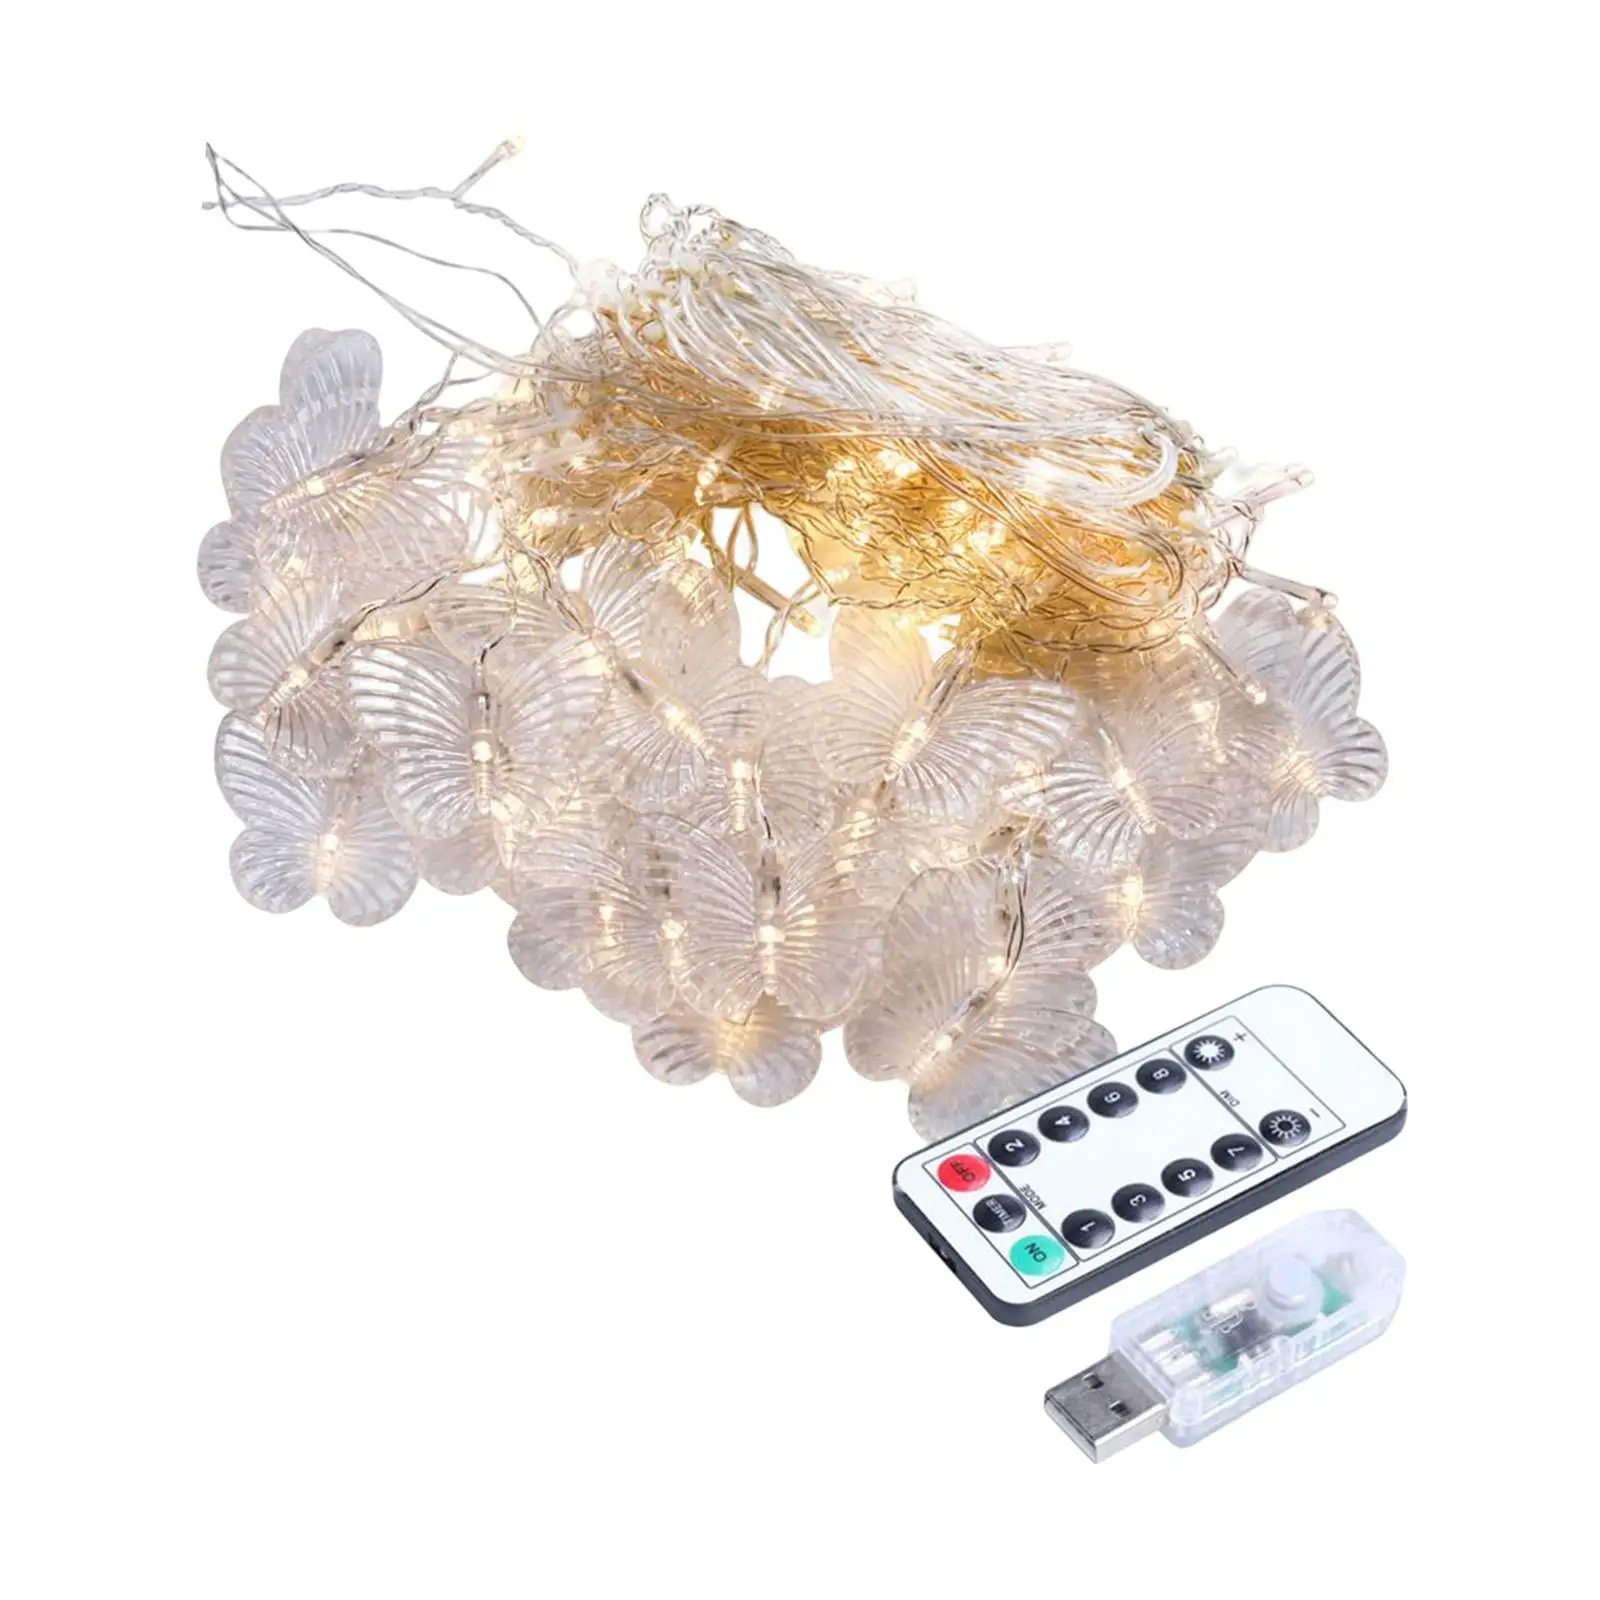 Curtain Lights Fairy String Lights Pendant Lamp Remote Control LED Butterfly Icicle Light for Festival Wedding Room